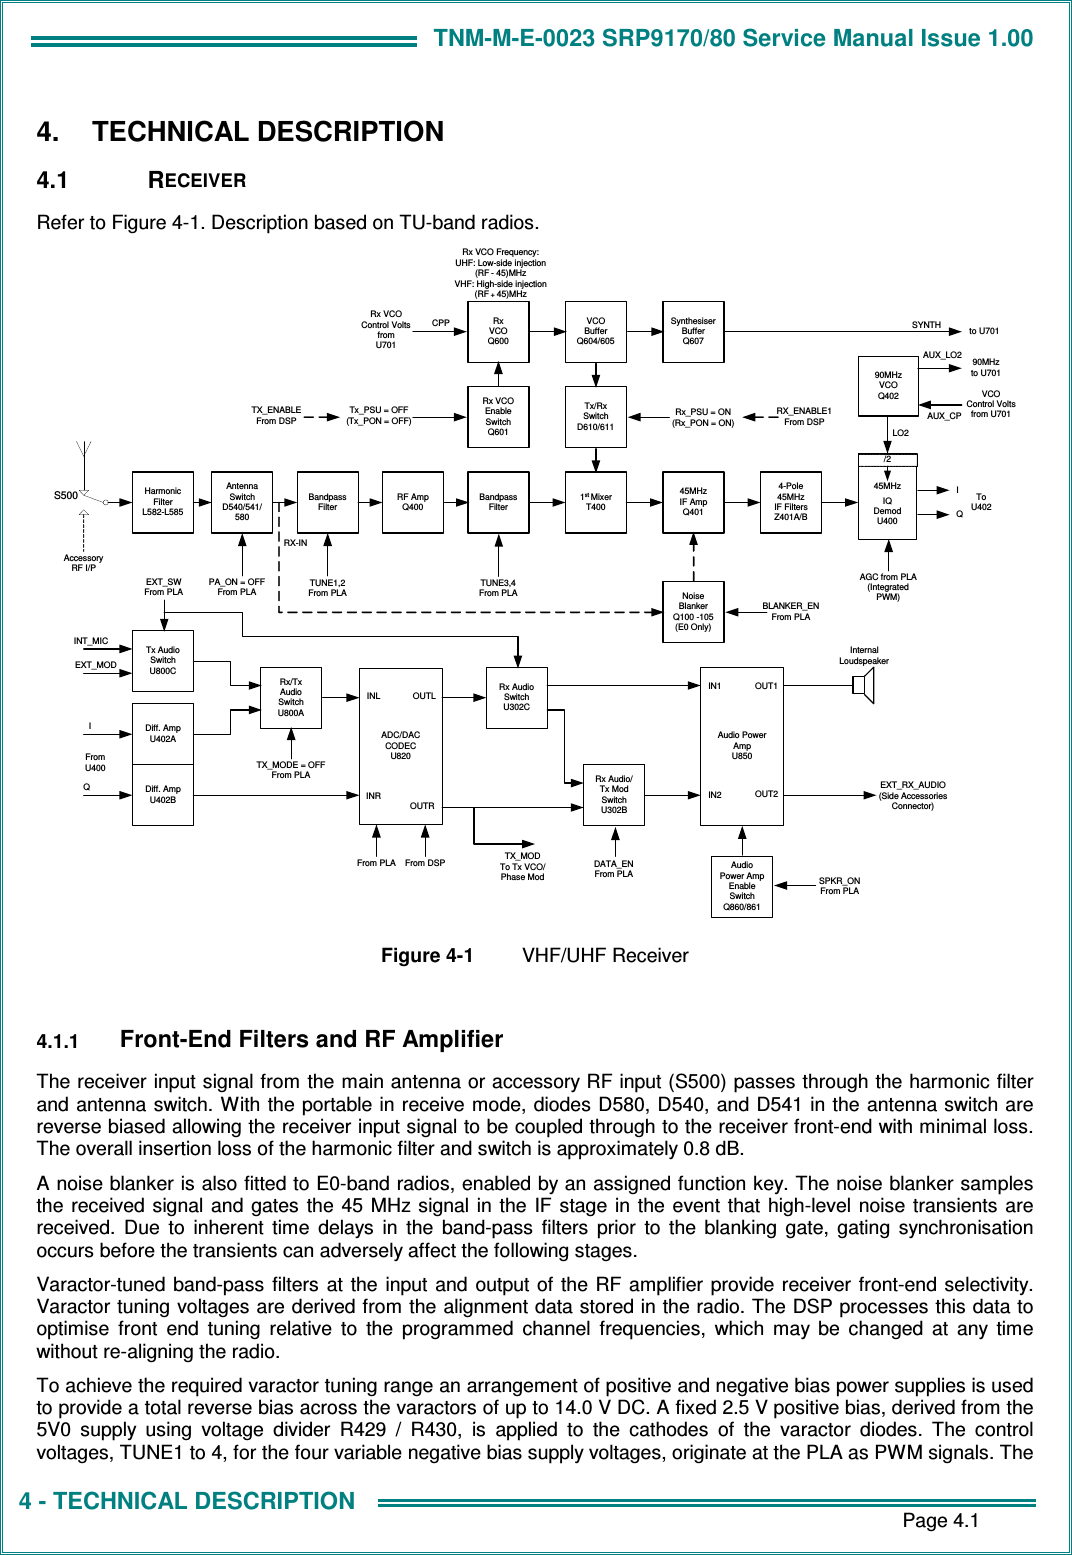 TNM-M-E-0023 SRP9170/80 Service Manual Issue 1.00       Page 4.1 4 - TECHNICAL DESCRIPTION 4.  TECHNICAL DESCRIPTION 4.1  RECEIVER Refer to Figure 4-1. Description based on TU-band radios. ADC/DACCODECU820IQDemodU400S500HarmonicFilterL582-L585AntennaSwitchD540/541/580AccessoryRF I/PBandpassFilterPA_ON = OFFFrom PLATx/RxSwitchD610/611RF AmpQ400BandpassFilterTUNE1,2From PLA1stMixerT40045MHzIF AmpQ4014-Pole45MHzIF FiltersZ401A/BIQAGC from PLA(IntegratedPWM)90MHzVCOQ402/245MHz90MHzto U701VCOControl Voltsfrom U701LO2VCOBufferQ604/605SynthesiserBufferQ607to U701RxVCOQ600Rx VCO Frequency:UHF: Low-side injection(RF - 45)MHzVHF: High-side injection(RF + 45)MHzRx VCOEnableSwitchQ601CPPRx VCOControl VoltsfromU701Tx_PSU = OFF(Tx_PON = OFF) Rx_PSU = ON(Rx_PON = ON)NoiseBlankerQ100 -105(E0 Only)BLANKER_ENFrom PLATUNE3,4From PLATX_ENABLEFrom DSPRX_ENABLE1From DSPSYNTHAUX_LO2AUX_CPDiff. AmpU402ADiff. AmpU402BIQRx/TxAudioSwitchU800ATx AudioSwitchU800CINT_MICEXT_MODTX_MODE = OFFFrom PLAFrom PLA From DSPRx AudioSwitchU302CRx Audio/Tx ModSwitchU302BEXT_SWFrom PLADATA_ENFrom PLAEXT_RX_AUDIO(Side AccessoriesConnector)InternalLoudspeakerSPKR_ONFrom PLAAudio PowerAmpU850IN1IN2OUT1OUT2AudioPower AmpEnableSwitchQ860/861INLINROUTLOUTRFromU400ToU402TX_MODTo Tx VCO/Phase ModRX-IN Figure 4-1  VHF/UHF Receiver  4.1.1 Front-End Filters and RF Amplifier The receiver input signal from the main antenna or accessory RF input (S500) passes through the harmonic filter and antenna switch. With the portable in receive mode, diodes D580, D540, and D541 in the antenna switch are reverse biased allowing the receiver input signal to be coupled through to the receiver front-end with minimal loss. The overall insertion loss of the harmonic filter and switch is approximately 0.8 dB. A noise blanker is also fitted to E0-band radios, enabled by an assigned function key. The noise blanker samples the received  signal and  gates  the 45  MHz signal in the  IF stage  in the  event  that high-level noise  transients are received.  Due  to  inherent  time  delays  in  the  band-pass  filters  prior  to  the  blanking  gate,  gating  synchronisation occurs before the transients can adversely affect the following stages. Varactor-tuned  band-pass  filters  at  the input and  output of the RF amplifier  provide receiver  front-end selectivity. Varactor tuning voltages are derived from the alignment data stored in the radio. The DSP processes this data to optimise  front  end  tuning  relative  to  the  programmed  channel  frequencies,  which  may  be  changed  at  any  time without re-aligning the radio. To achieve the required varactor tuning range an arrangement of positive and negative bias power supplies is used to provide a total reverse bias across the varactors of up to 14.0 V DC. A fixed 2.5 V positive bias, derived from the 5V0  supply  using  voltage  divider  R429  /  R430,  is  applied  to  the  cathodes  of  the  varactor  diodes.  The  control voltages, TUNE1 to 4, for the four variable negative bias supply voltages, originate at the PLA as PWM signals. The 